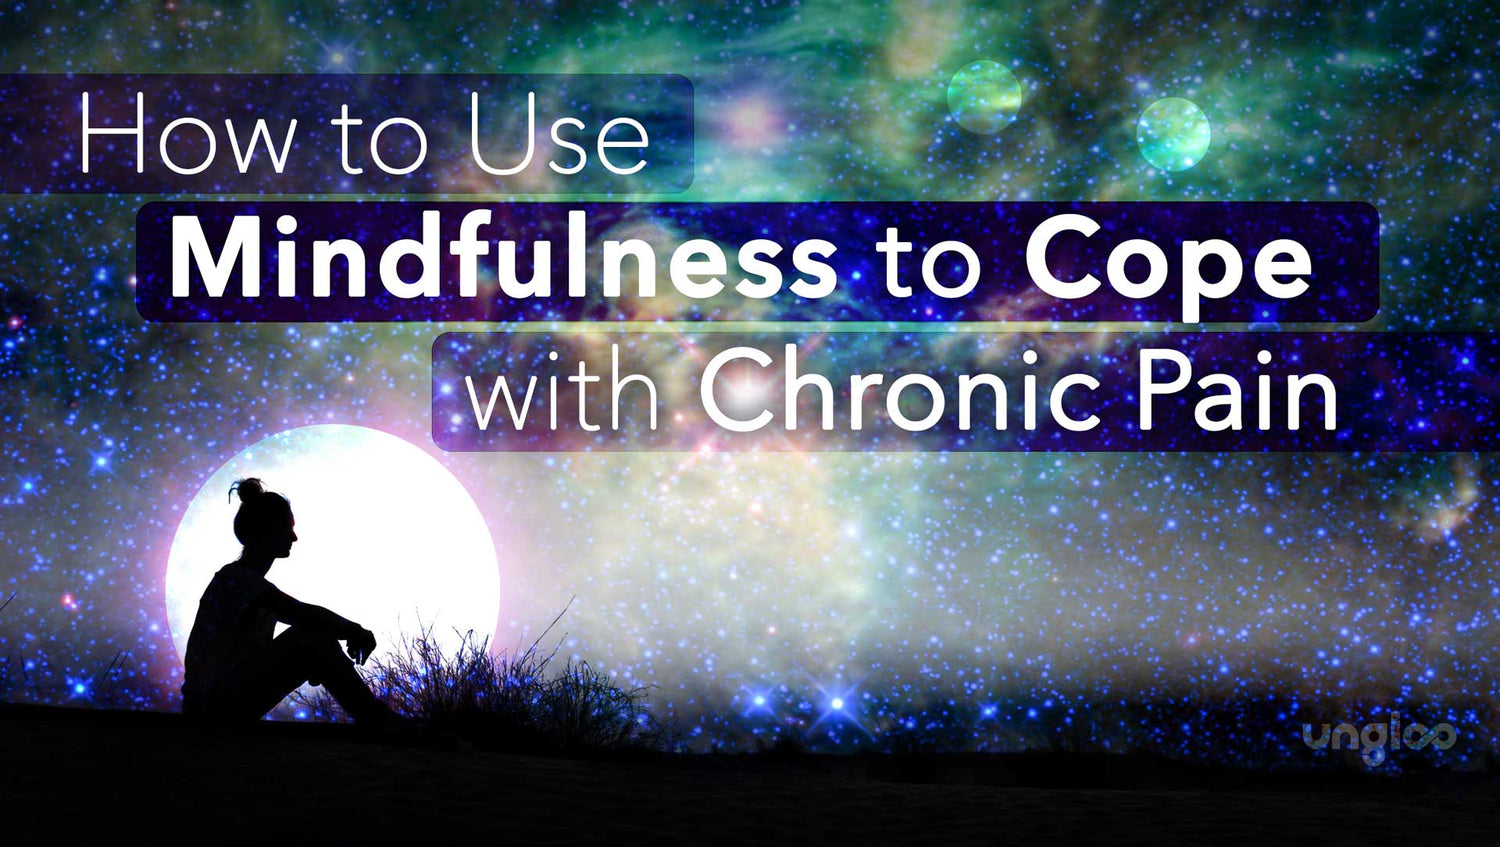 using mindfulness to cope with chronic pain graphic for banner